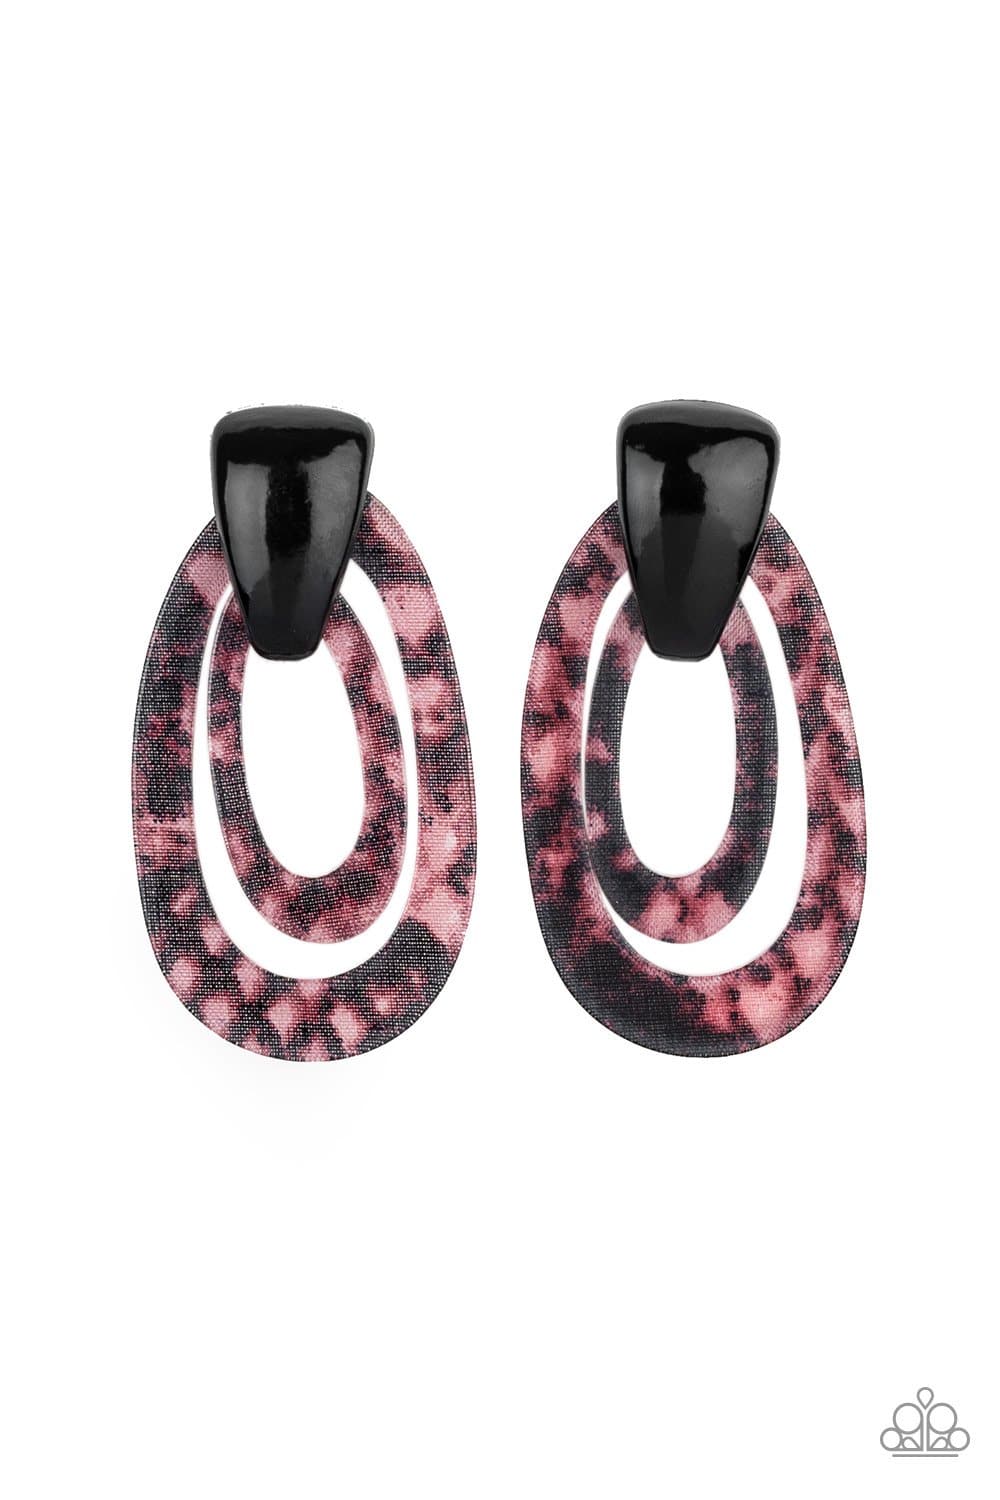 D130 - The HAUTE Zone Earrings by Paparazzi Accessories on Fancy5Fashion.com